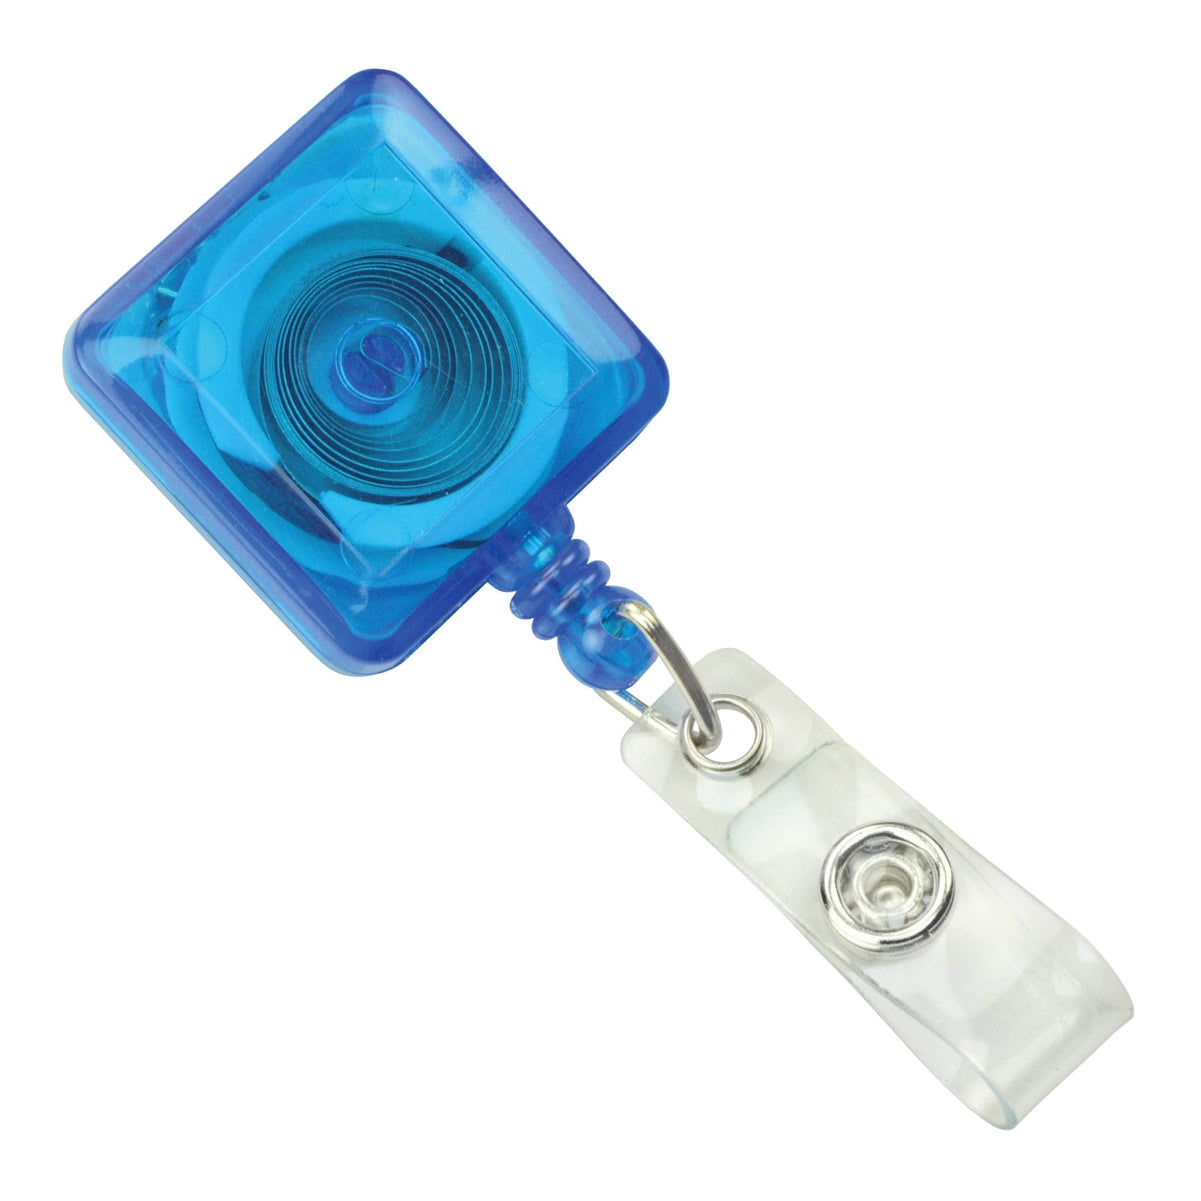 Monogrammed Pop of Colour Retractable Badge Reel features a